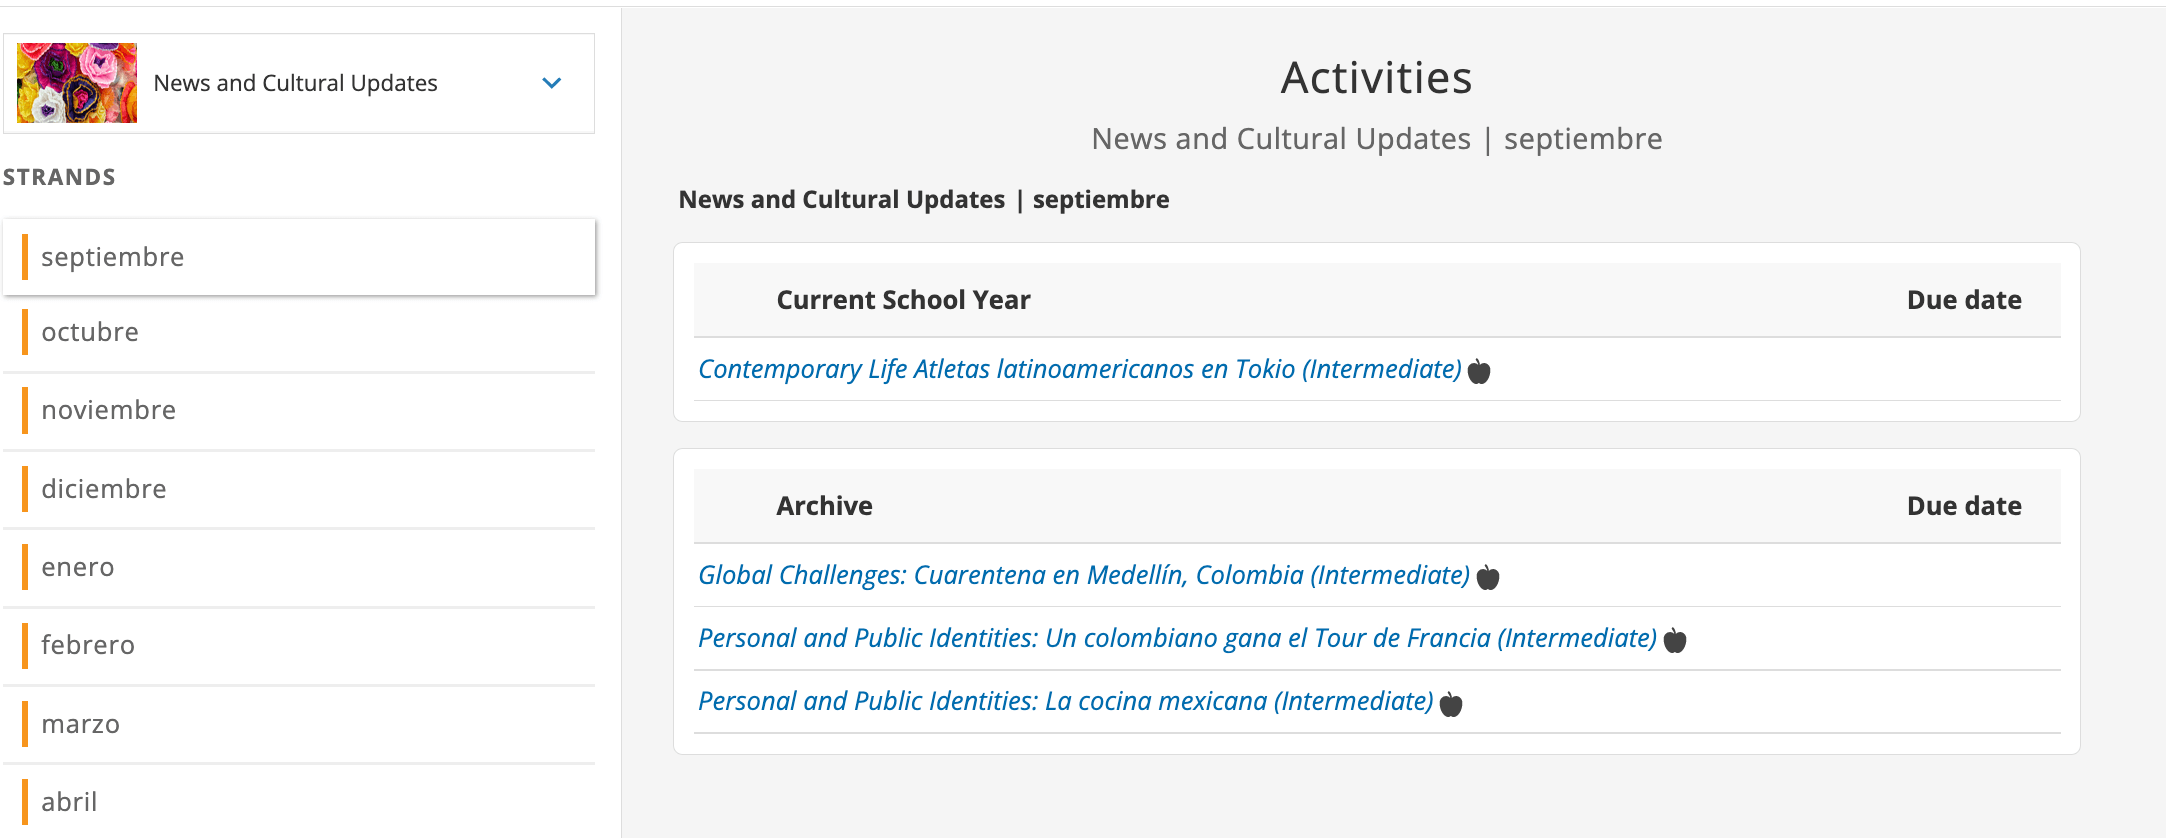 News and Cultural Updates